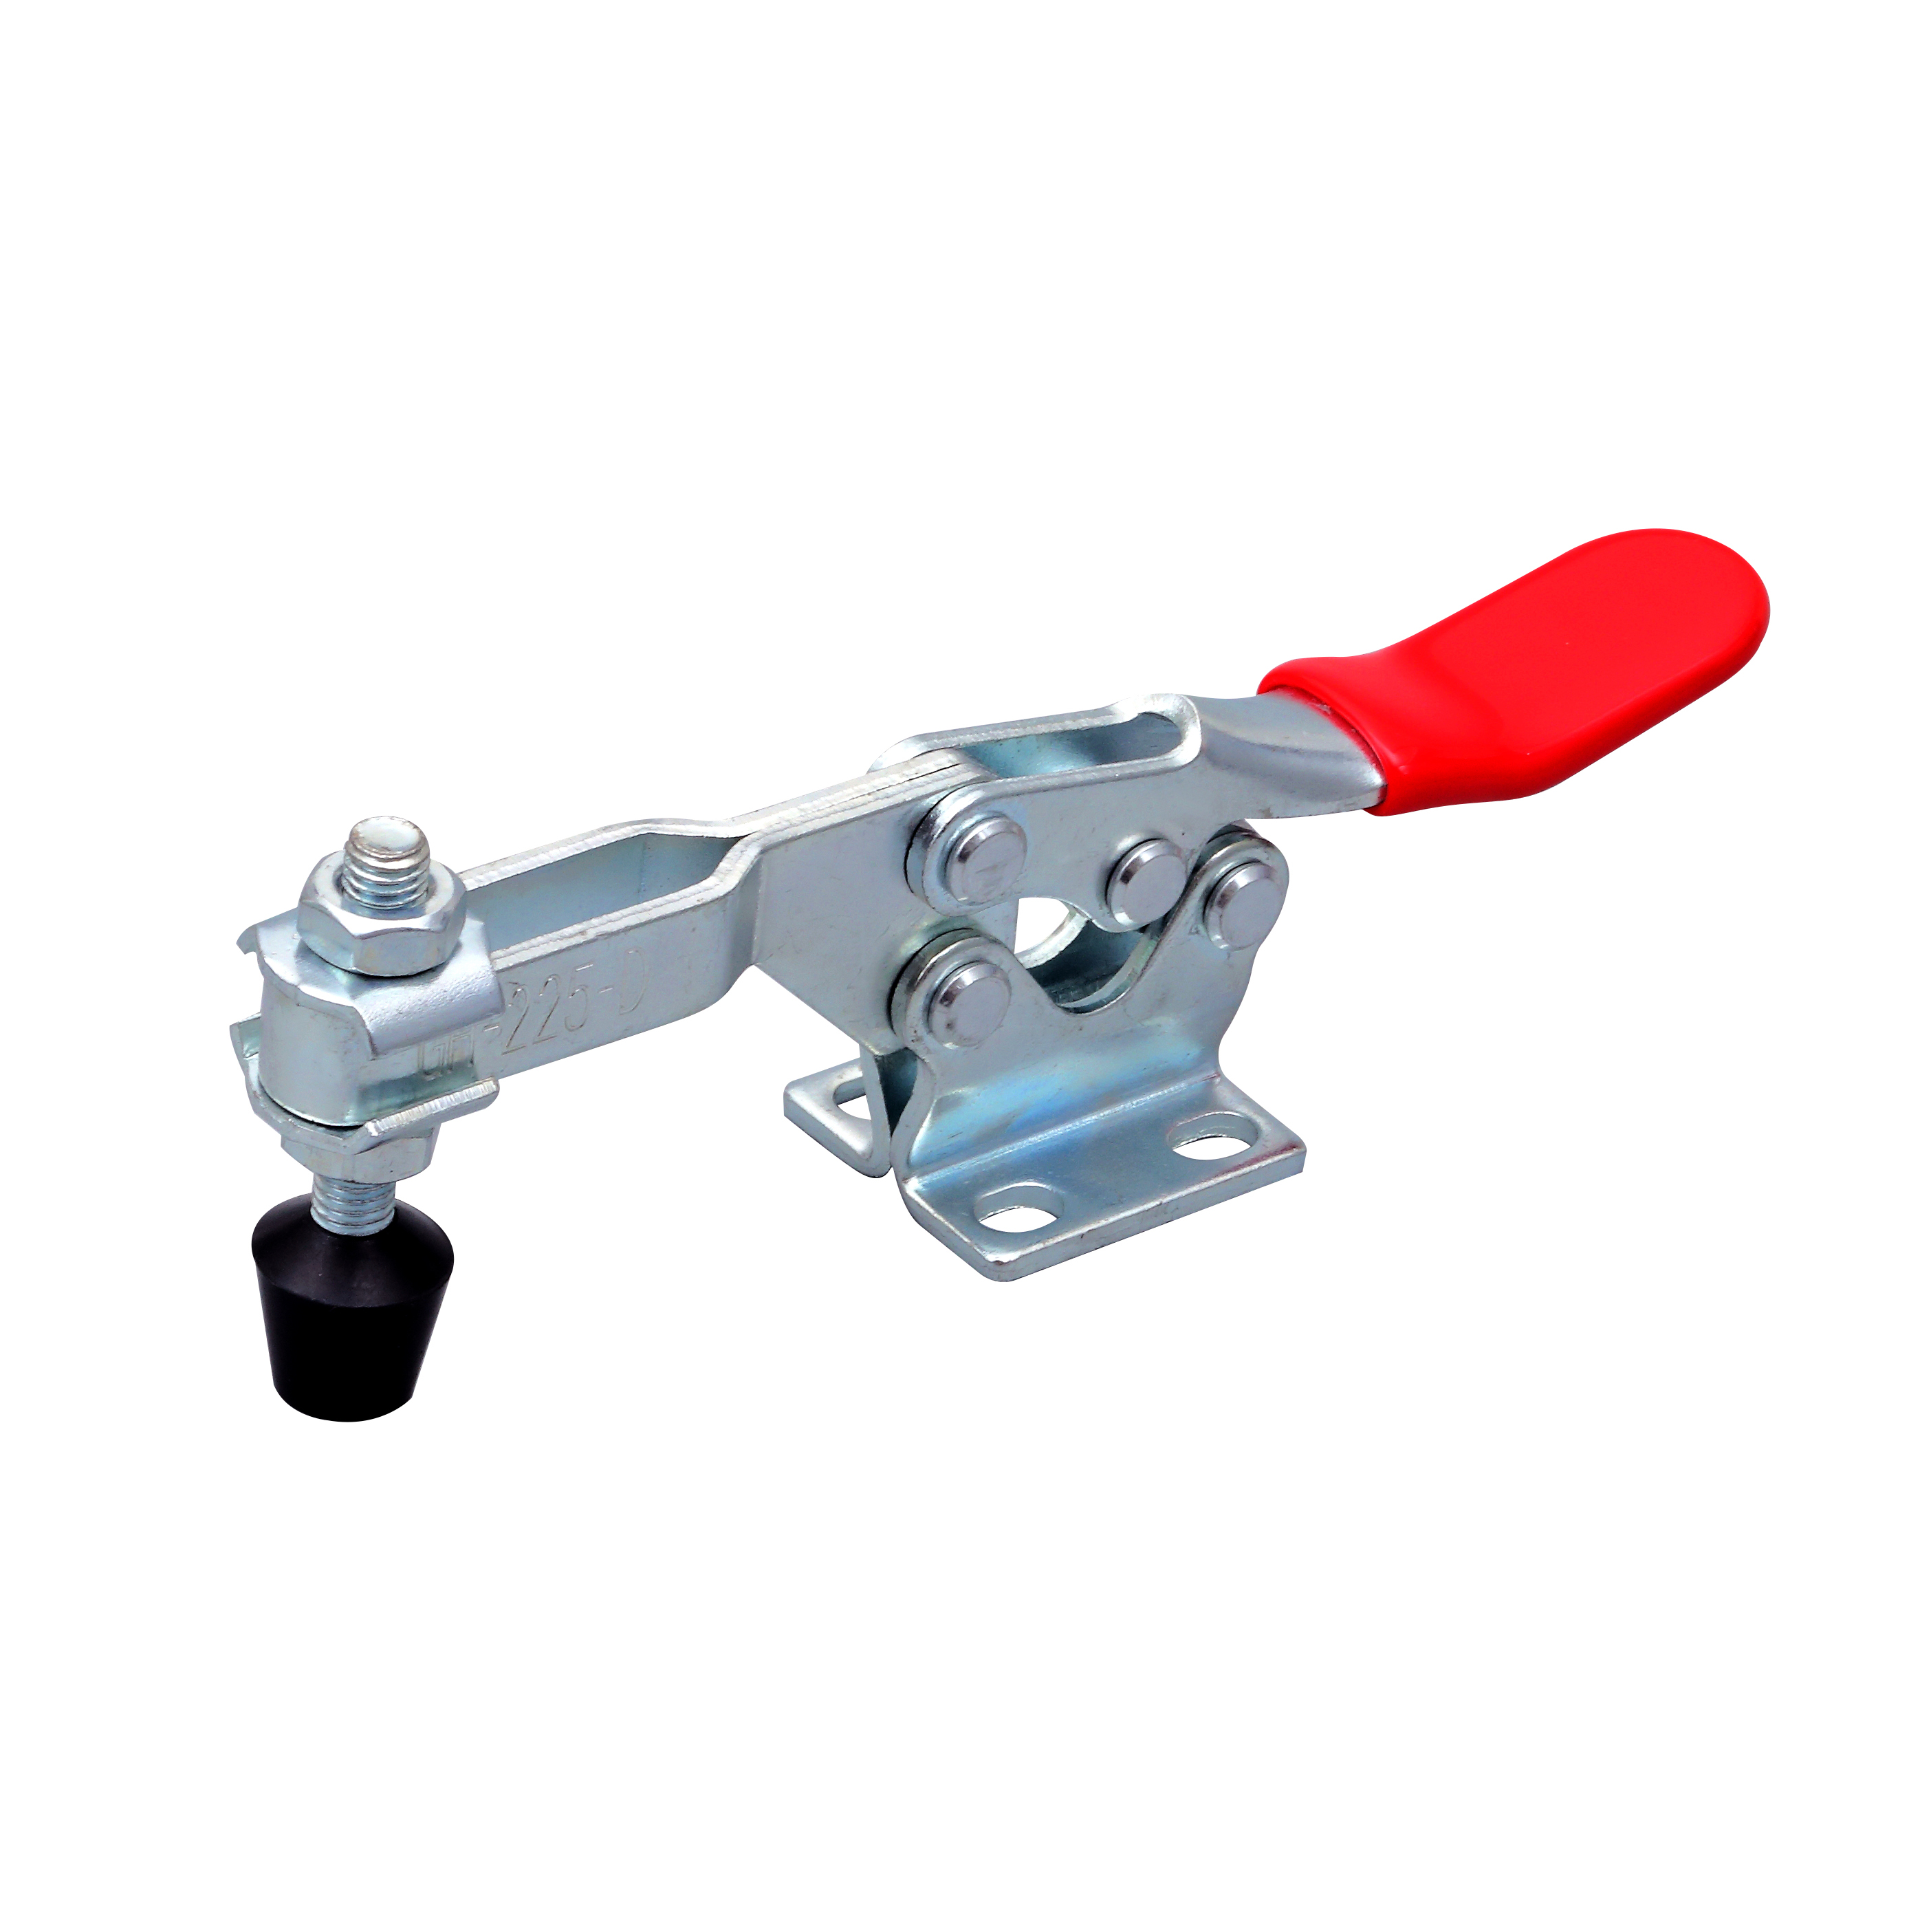 Hold Down Toggle Clamp GH-225-D